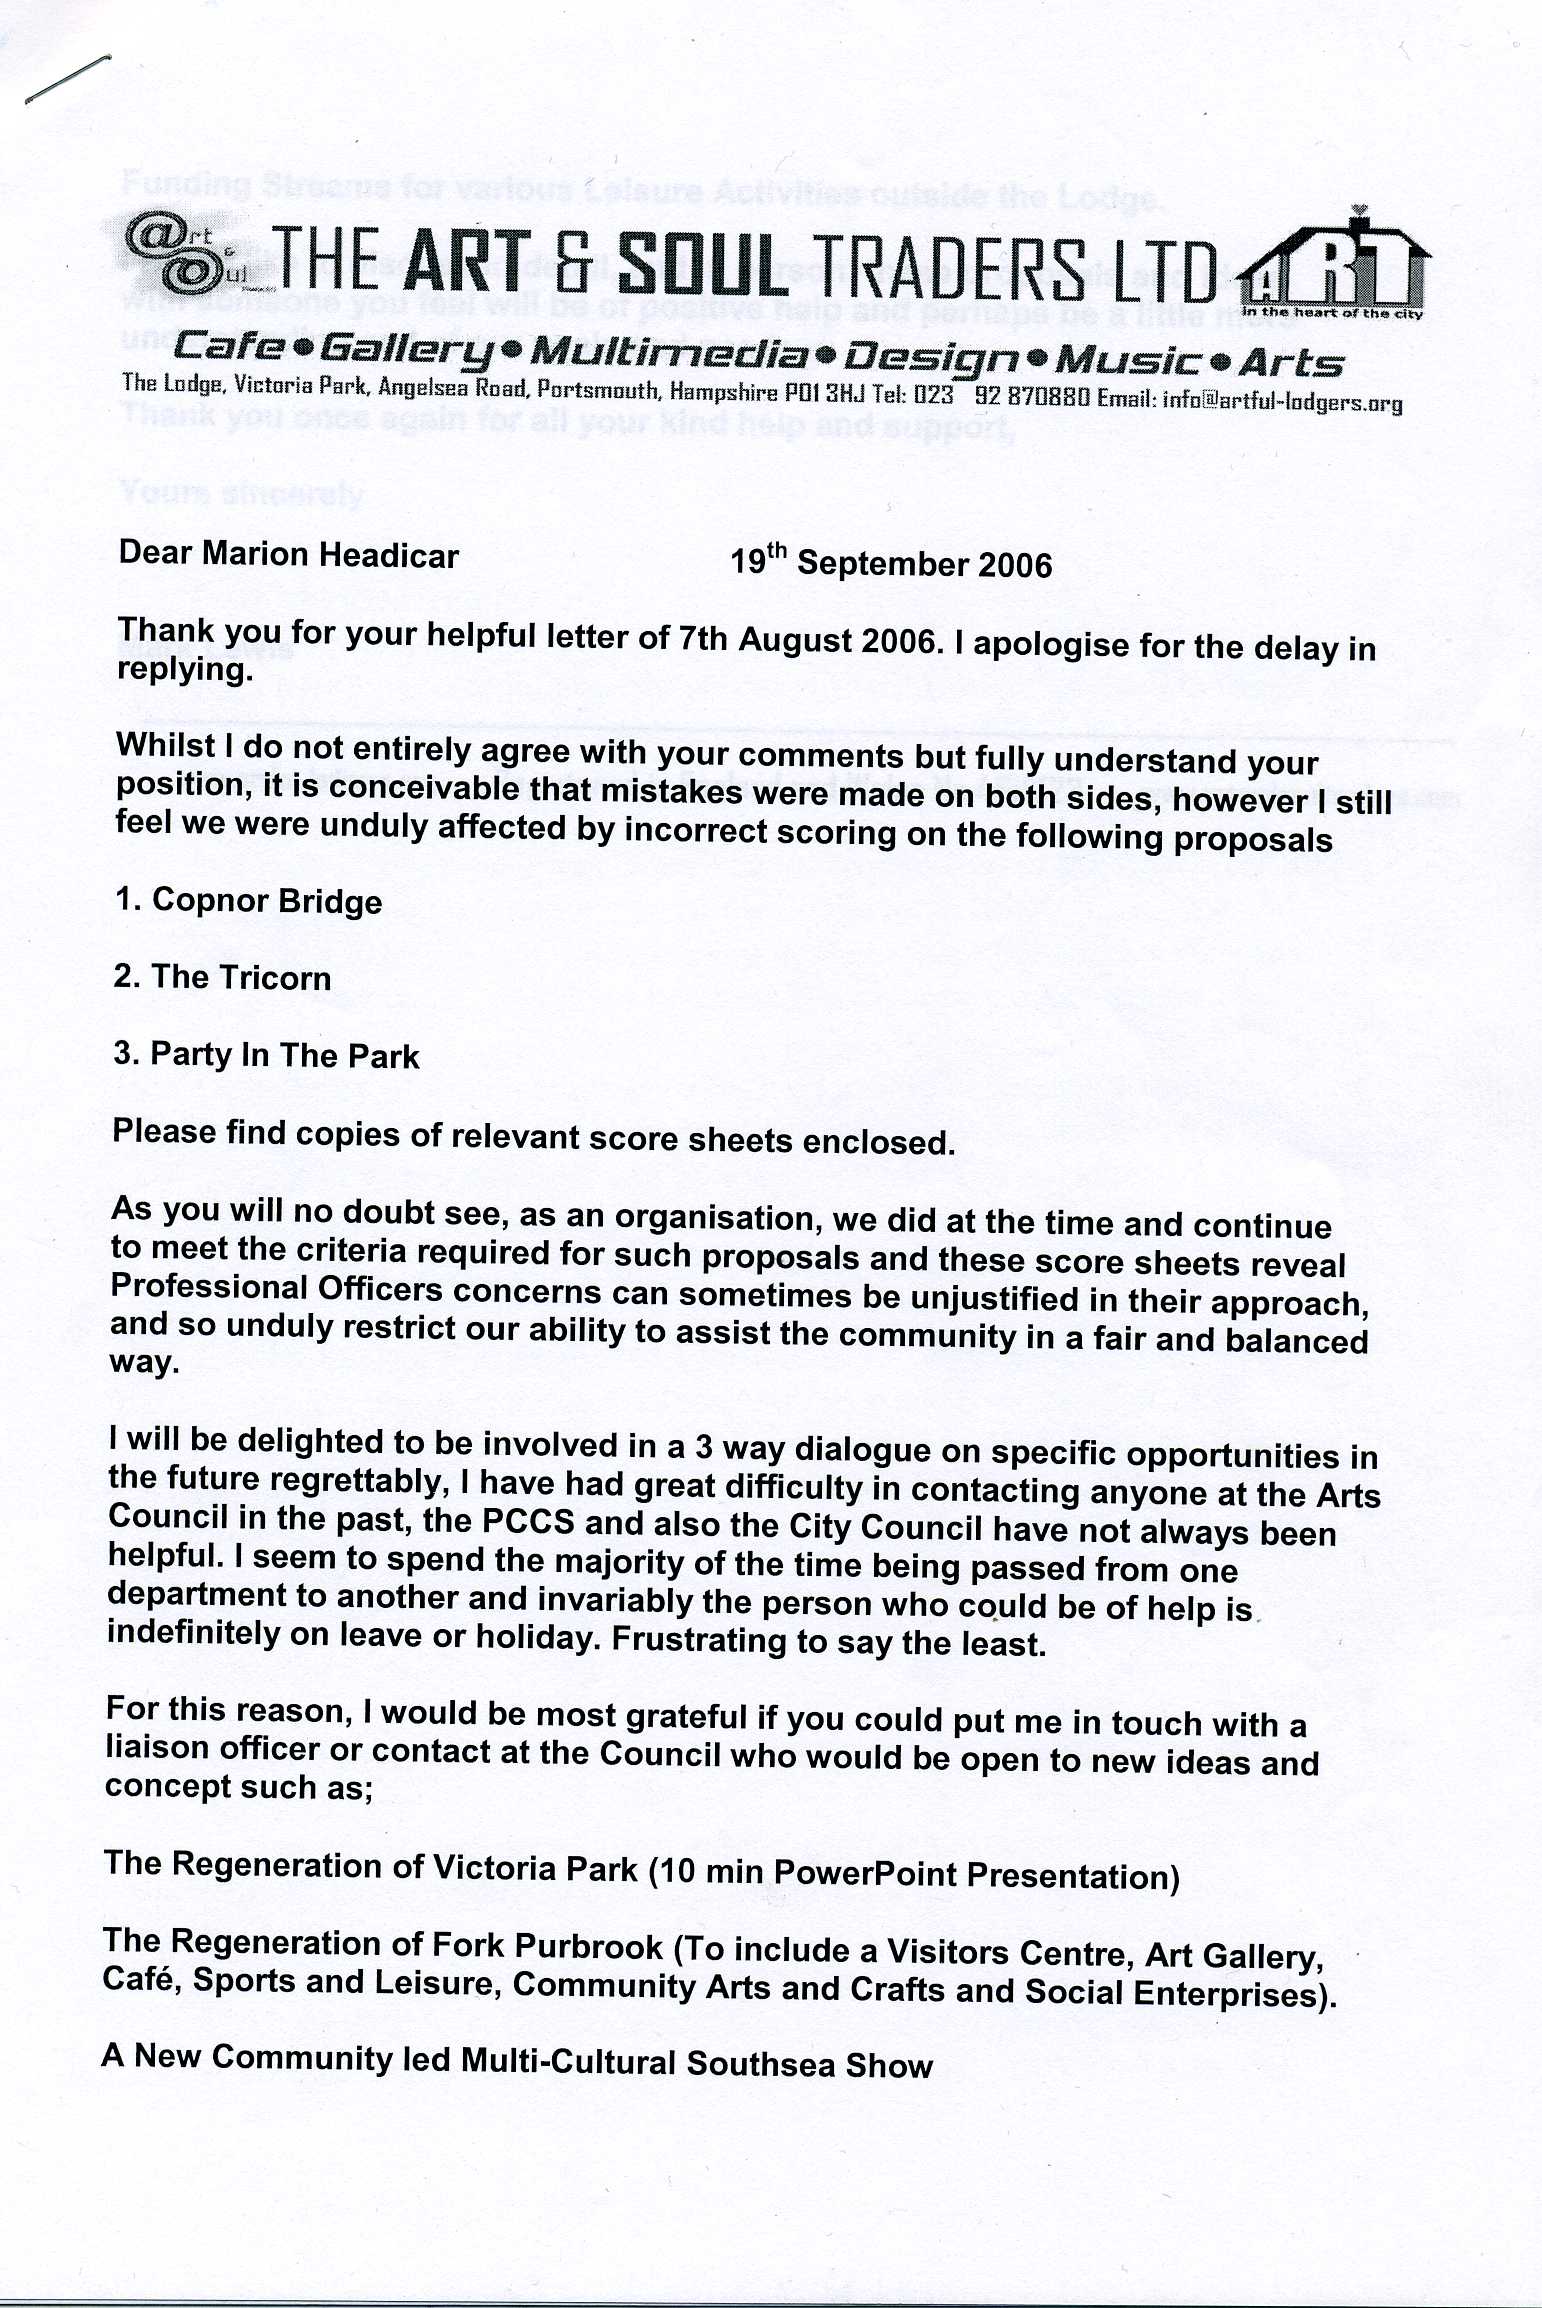 Our reply to Marion Headicar page 1